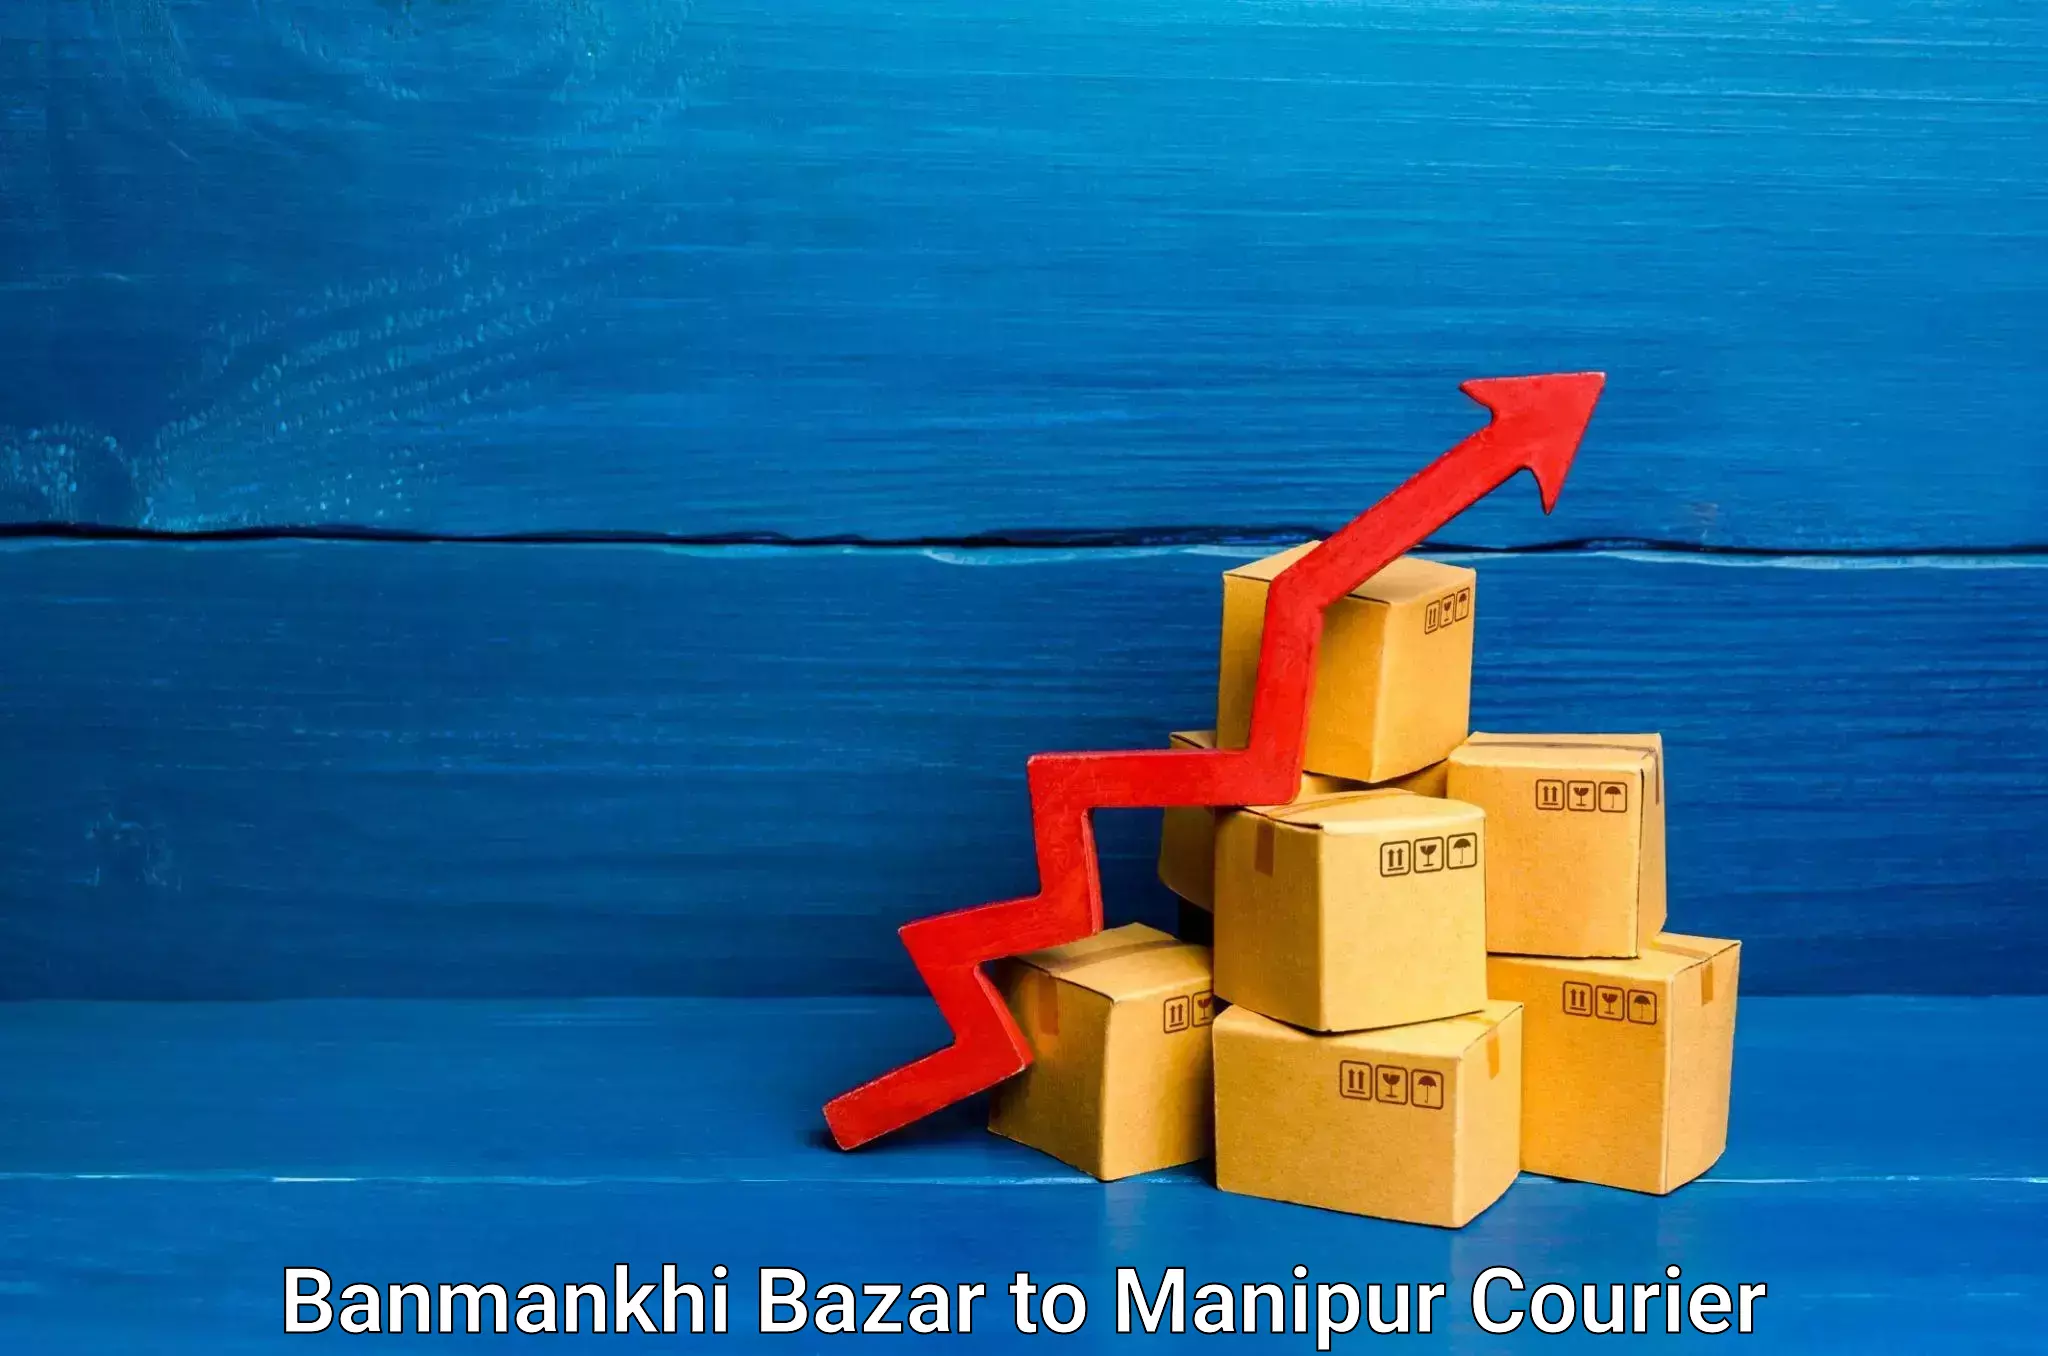 Furniture moving specialists Banmankhi Bazar to Manipur